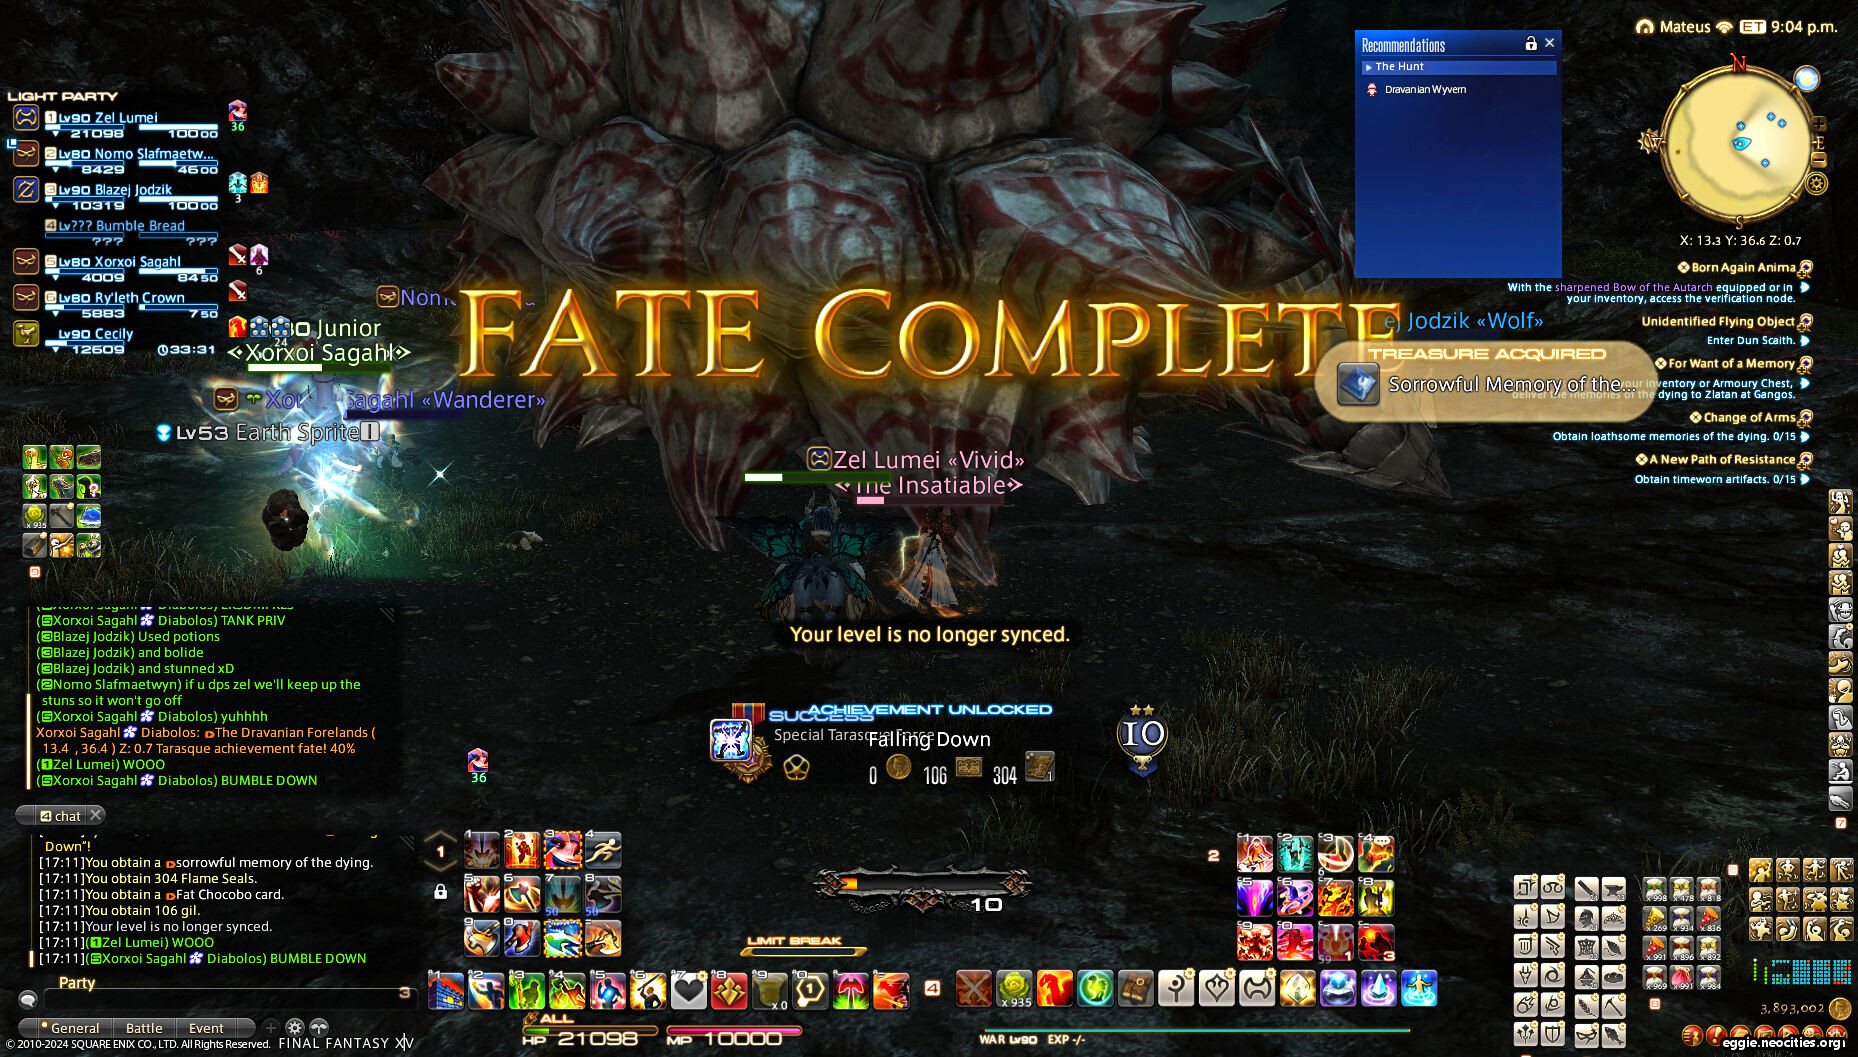 A cluttered screenshot showing FATE COMPLETED